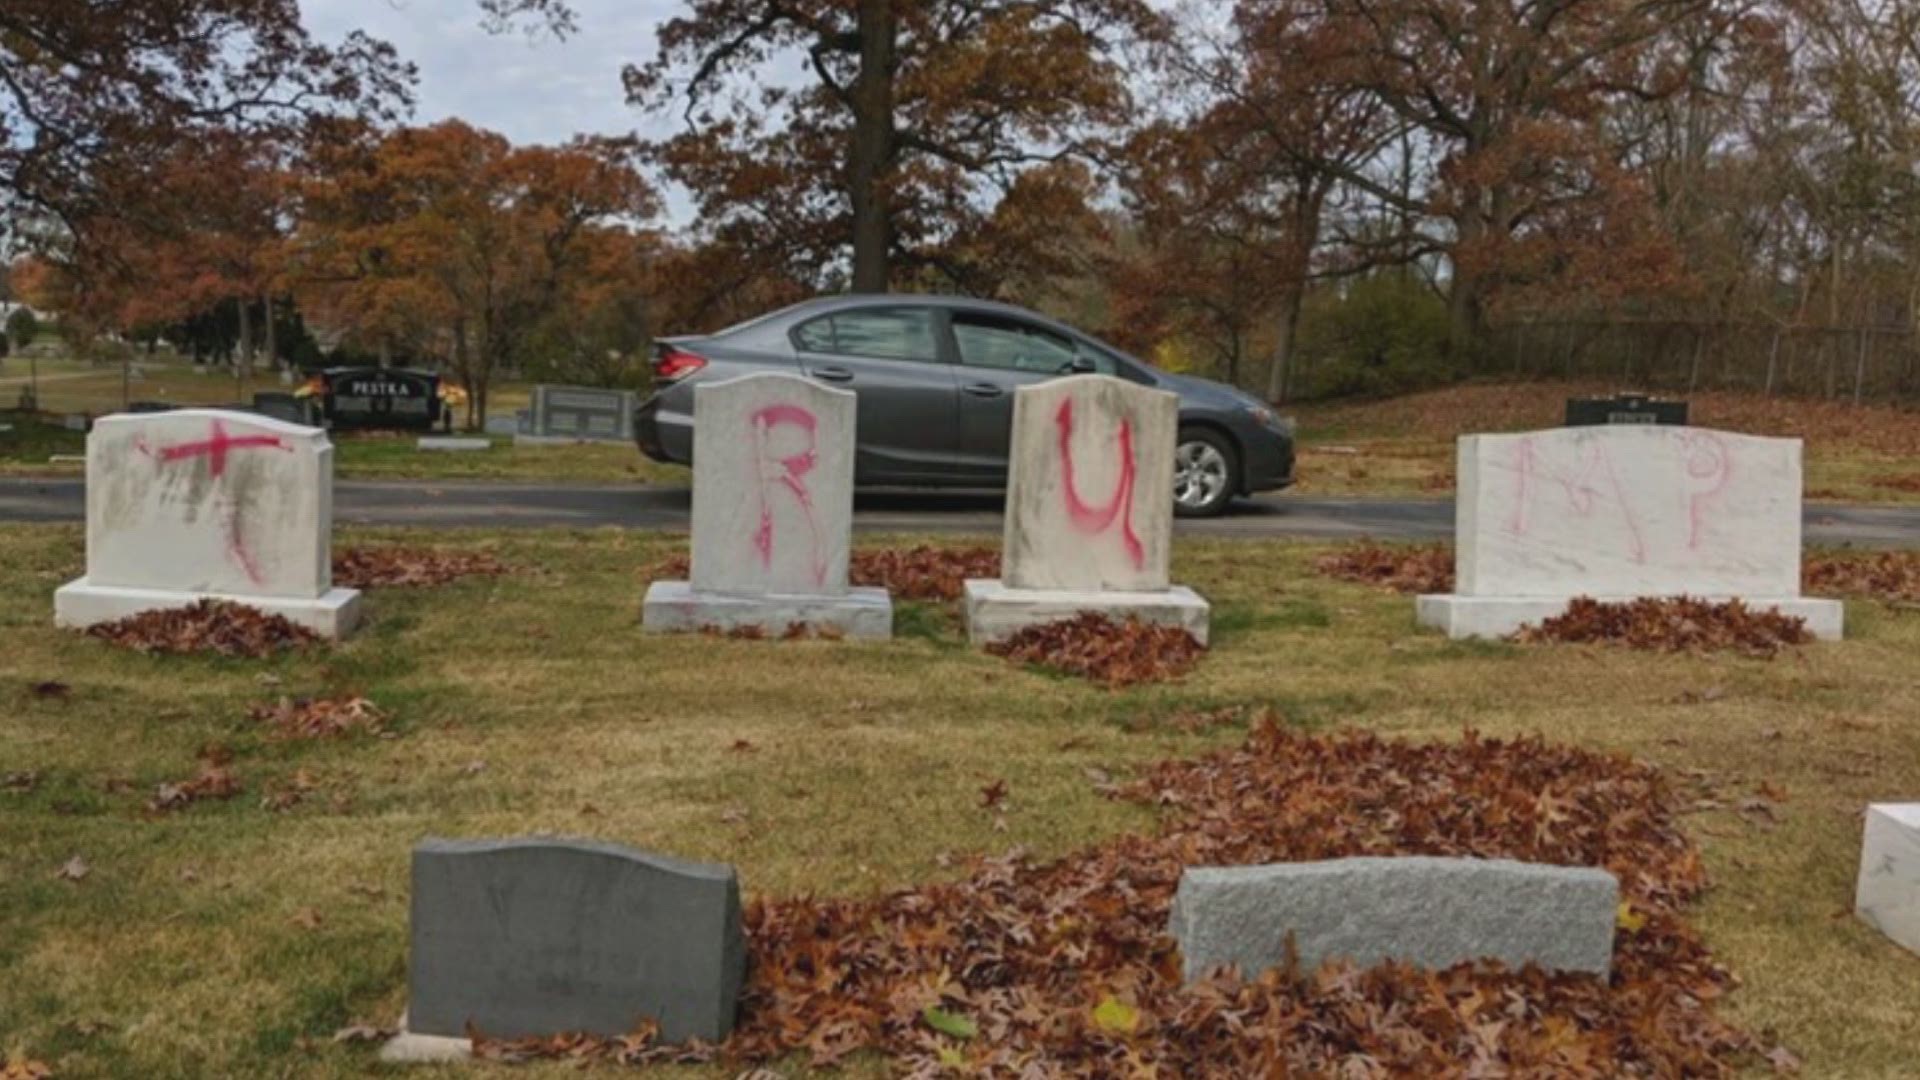 The night before the election, the Michigan Democratic Jewish Caucus said pro-Trump messages were painted on graves at a Grand Rapids cemetery.